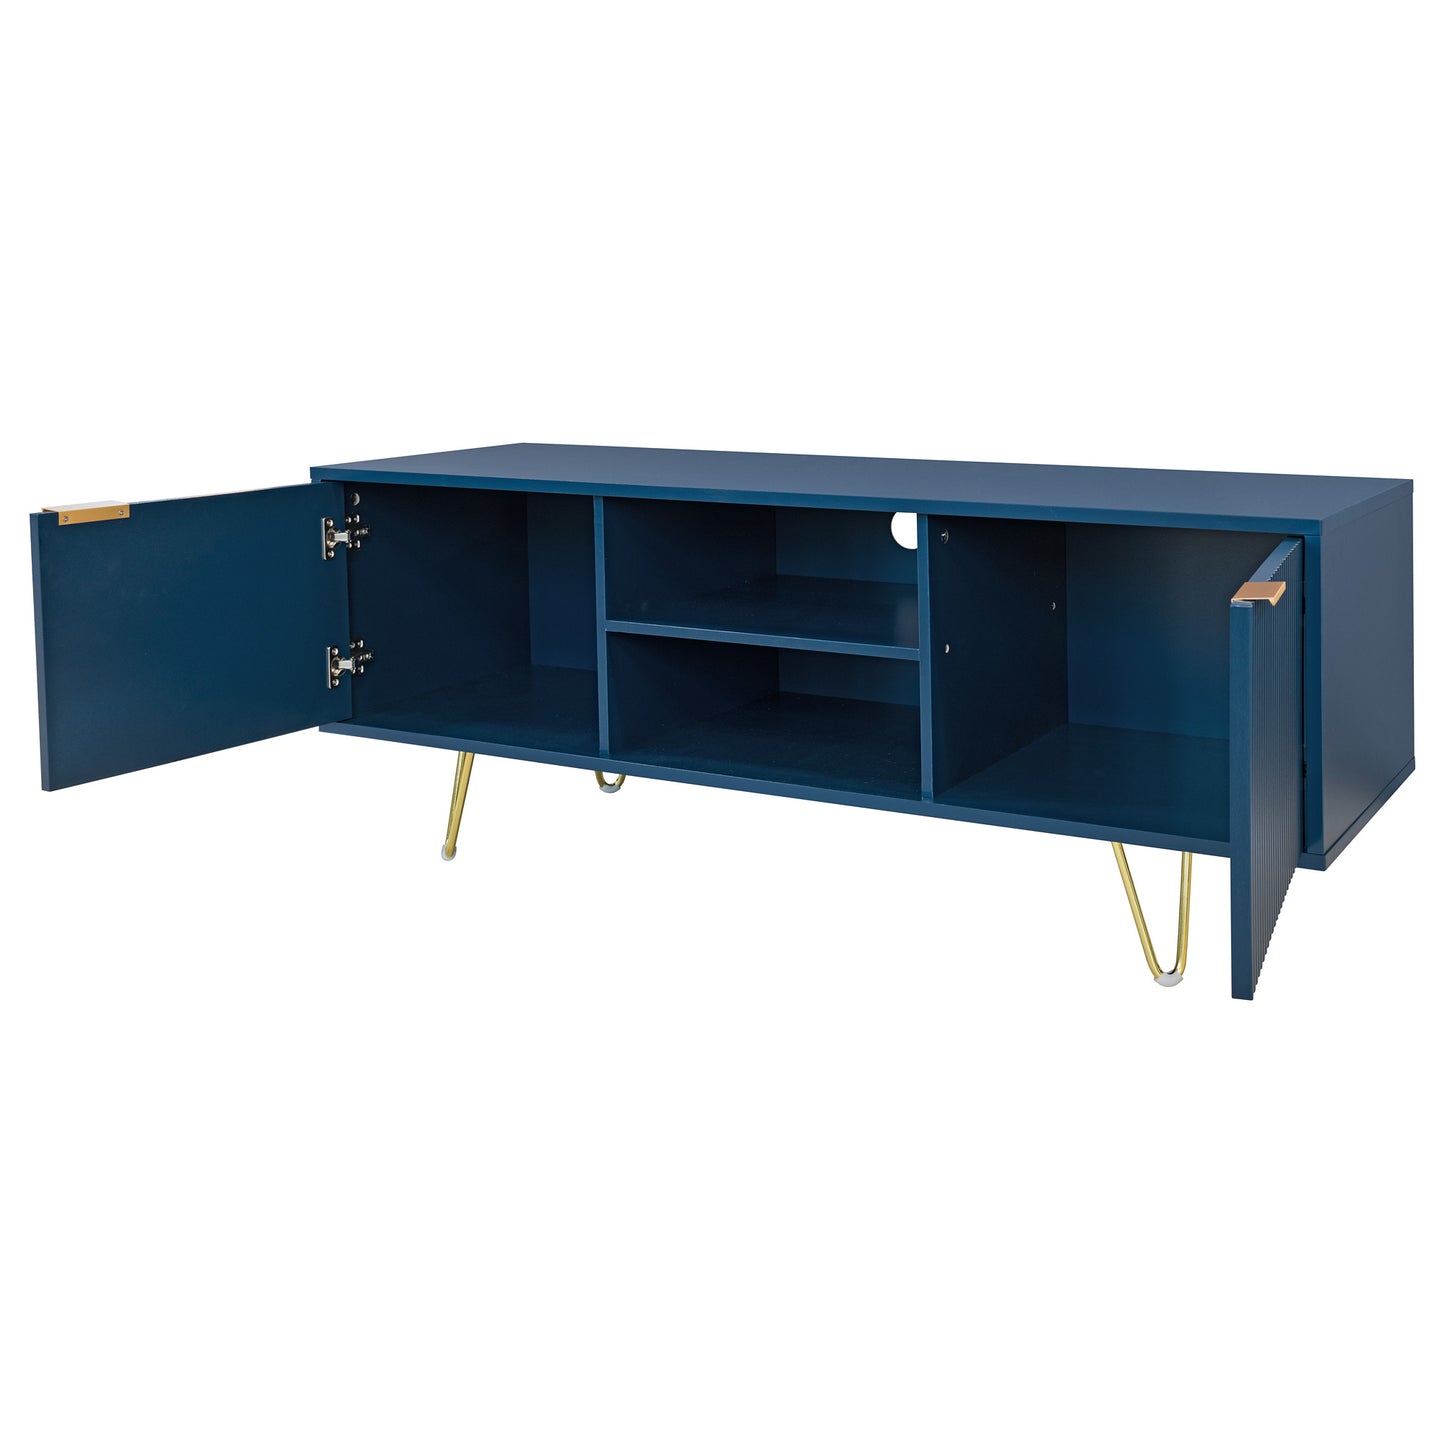 120cm wide Blue TV stand for up to 60” TV, Blue tv stand with Gold metal legs